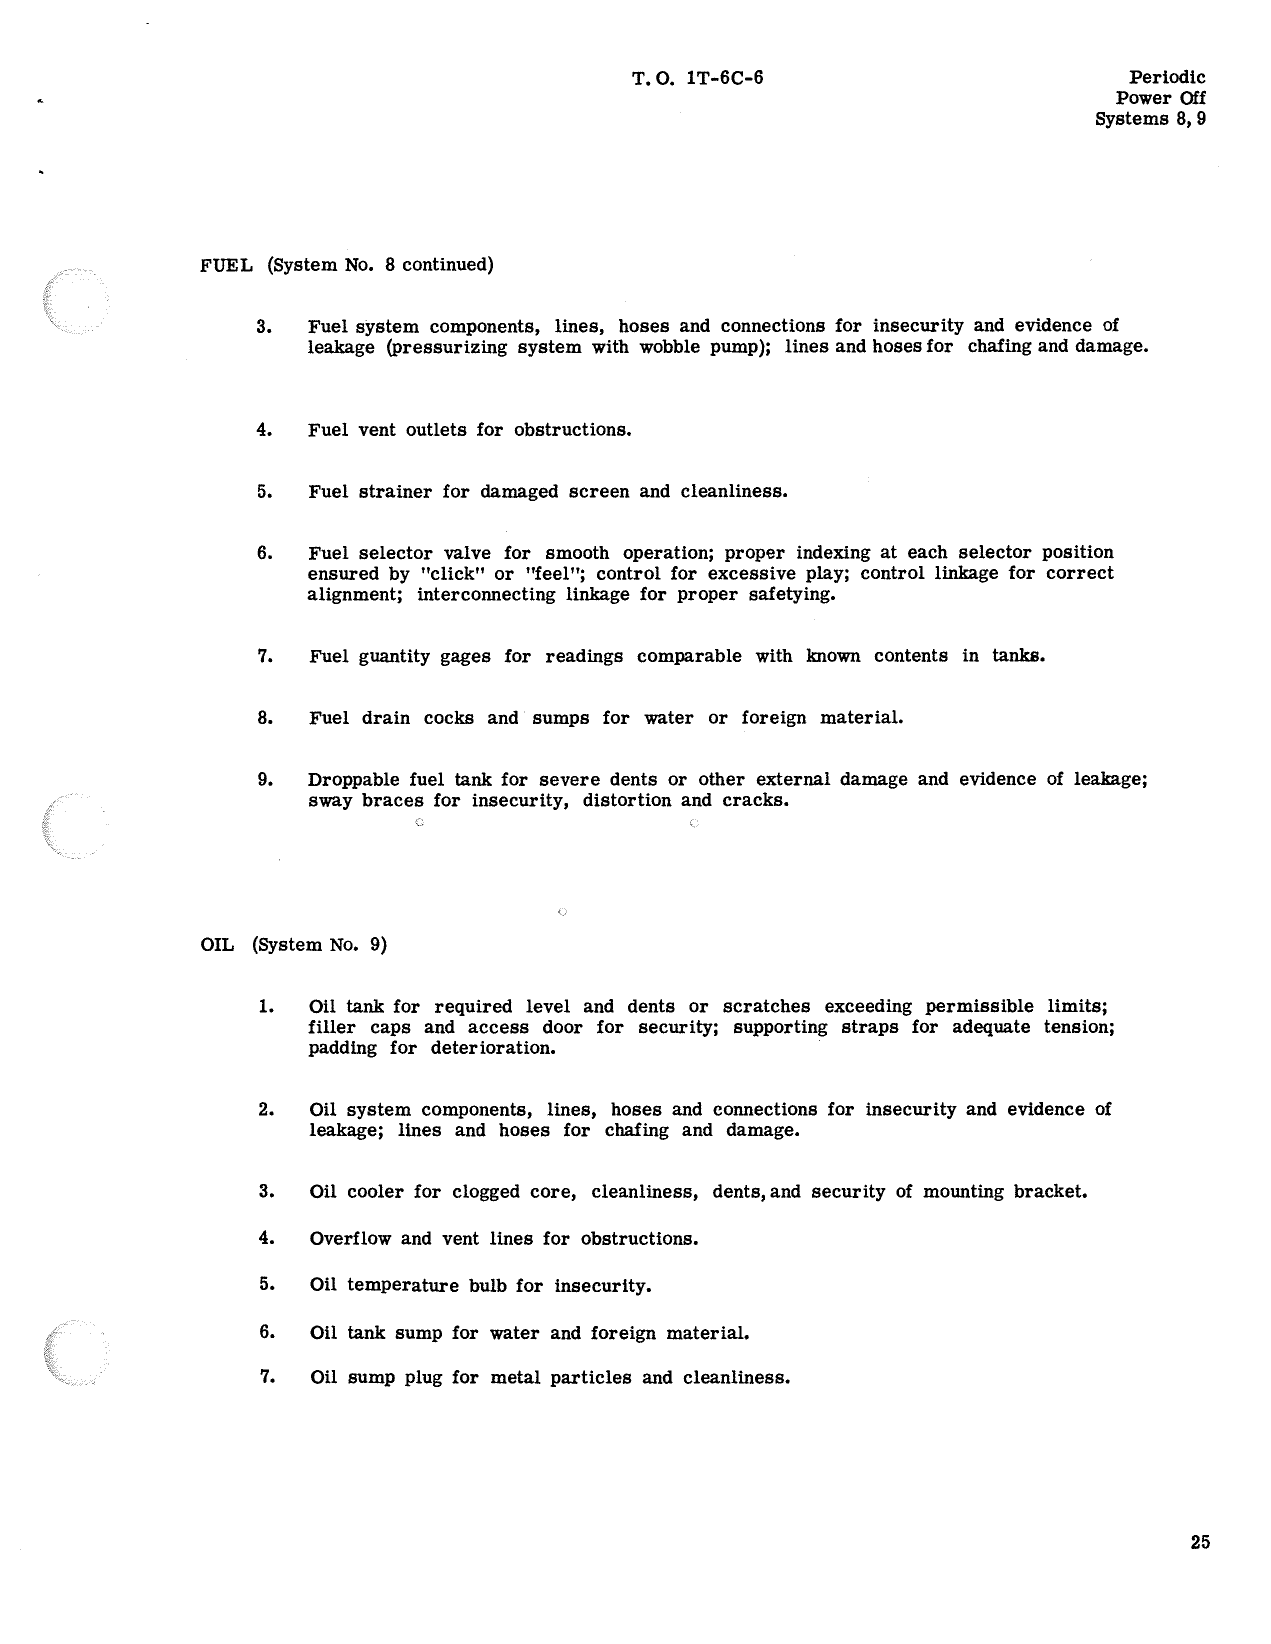 Sample page 29 from AirCorps Library document: Inspection Requirements T-6